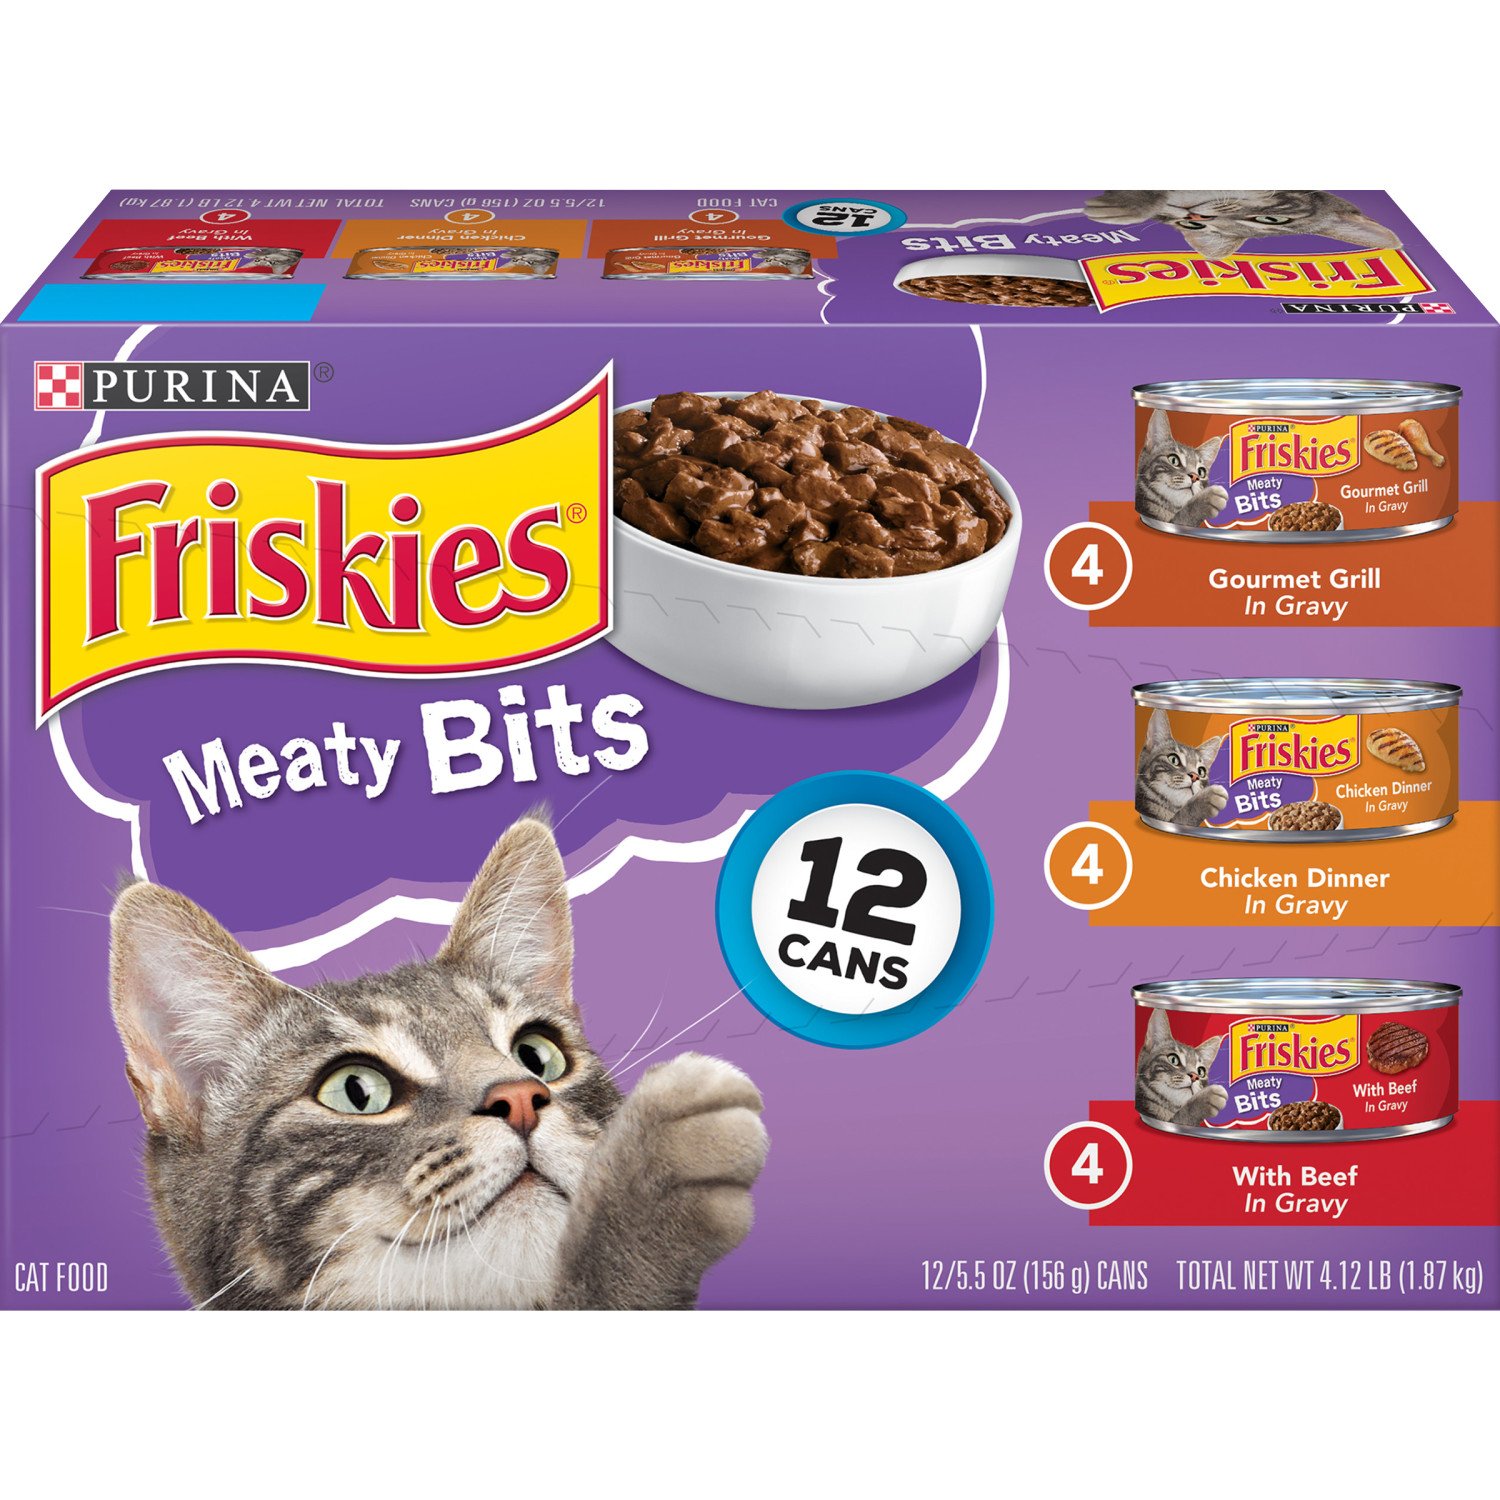 Purina Friskies Meaty Bits Cat Food Variety Pack Shop Cats at HEB